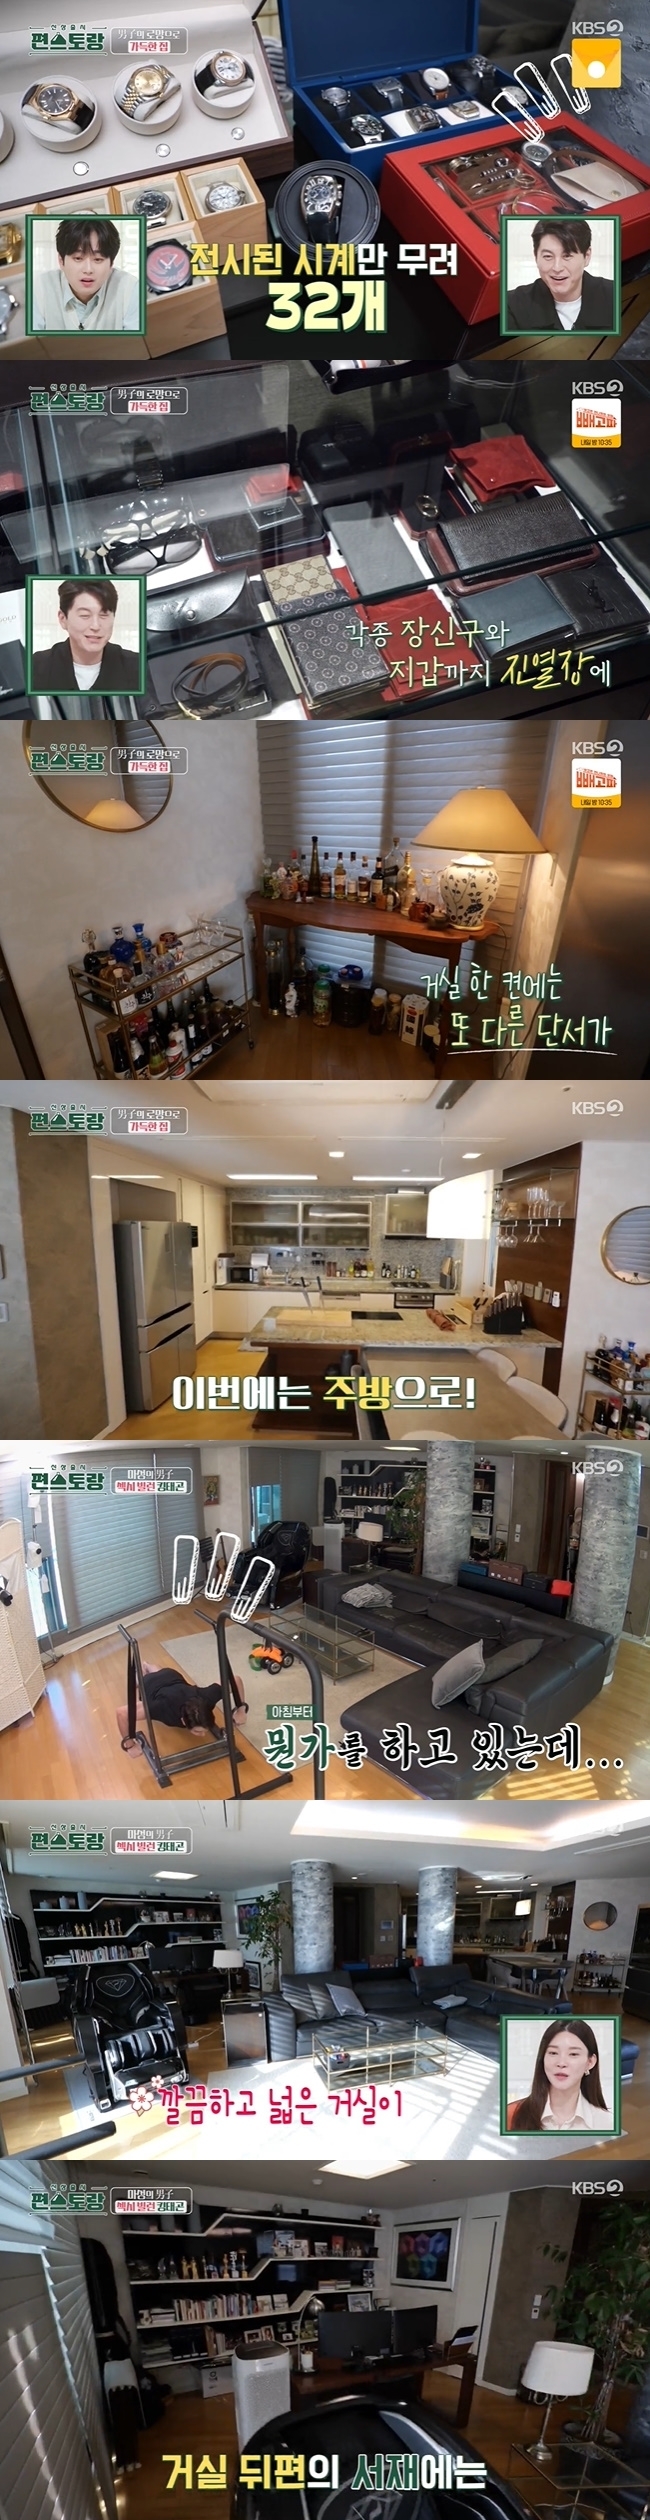 Lee Tae-gon has unveiled a home featuring luxurious Interiors.Lee Tae-gon appeared as a new chef on KBS 2TV Stars at New Launch Top Recipe at Fun-Staurant, which was broadcast on May 6.Lee Tae-gon, who joined Lee Chan-won with a new member, said, Lee Chan-won said he would win, but I came out to settle.In the public footage, Lee Tae-gons house was released; when the layers were opened and the living rooms large pillar appeared, and the inside of the house, which seemed to be in the drama, was revealed.On one side of the living room were 32 expensive watches, and various ornaments and wallets were displayed, and on one side were golf equipment showing his hobby.On the other side was a private bar set up with a variety of bottles and wine sellers, and the study behind the living room was filled with various trophies and scripts showing a 17-year acting career.There were pictures of Lee Tae-gon all over the place, and the kitchen, which was marble-interior, was full of luxurious feelings.Lee Tae-gon exploded masculinity as he opened his eyes and worked out with exercise equipment he had in his living room.